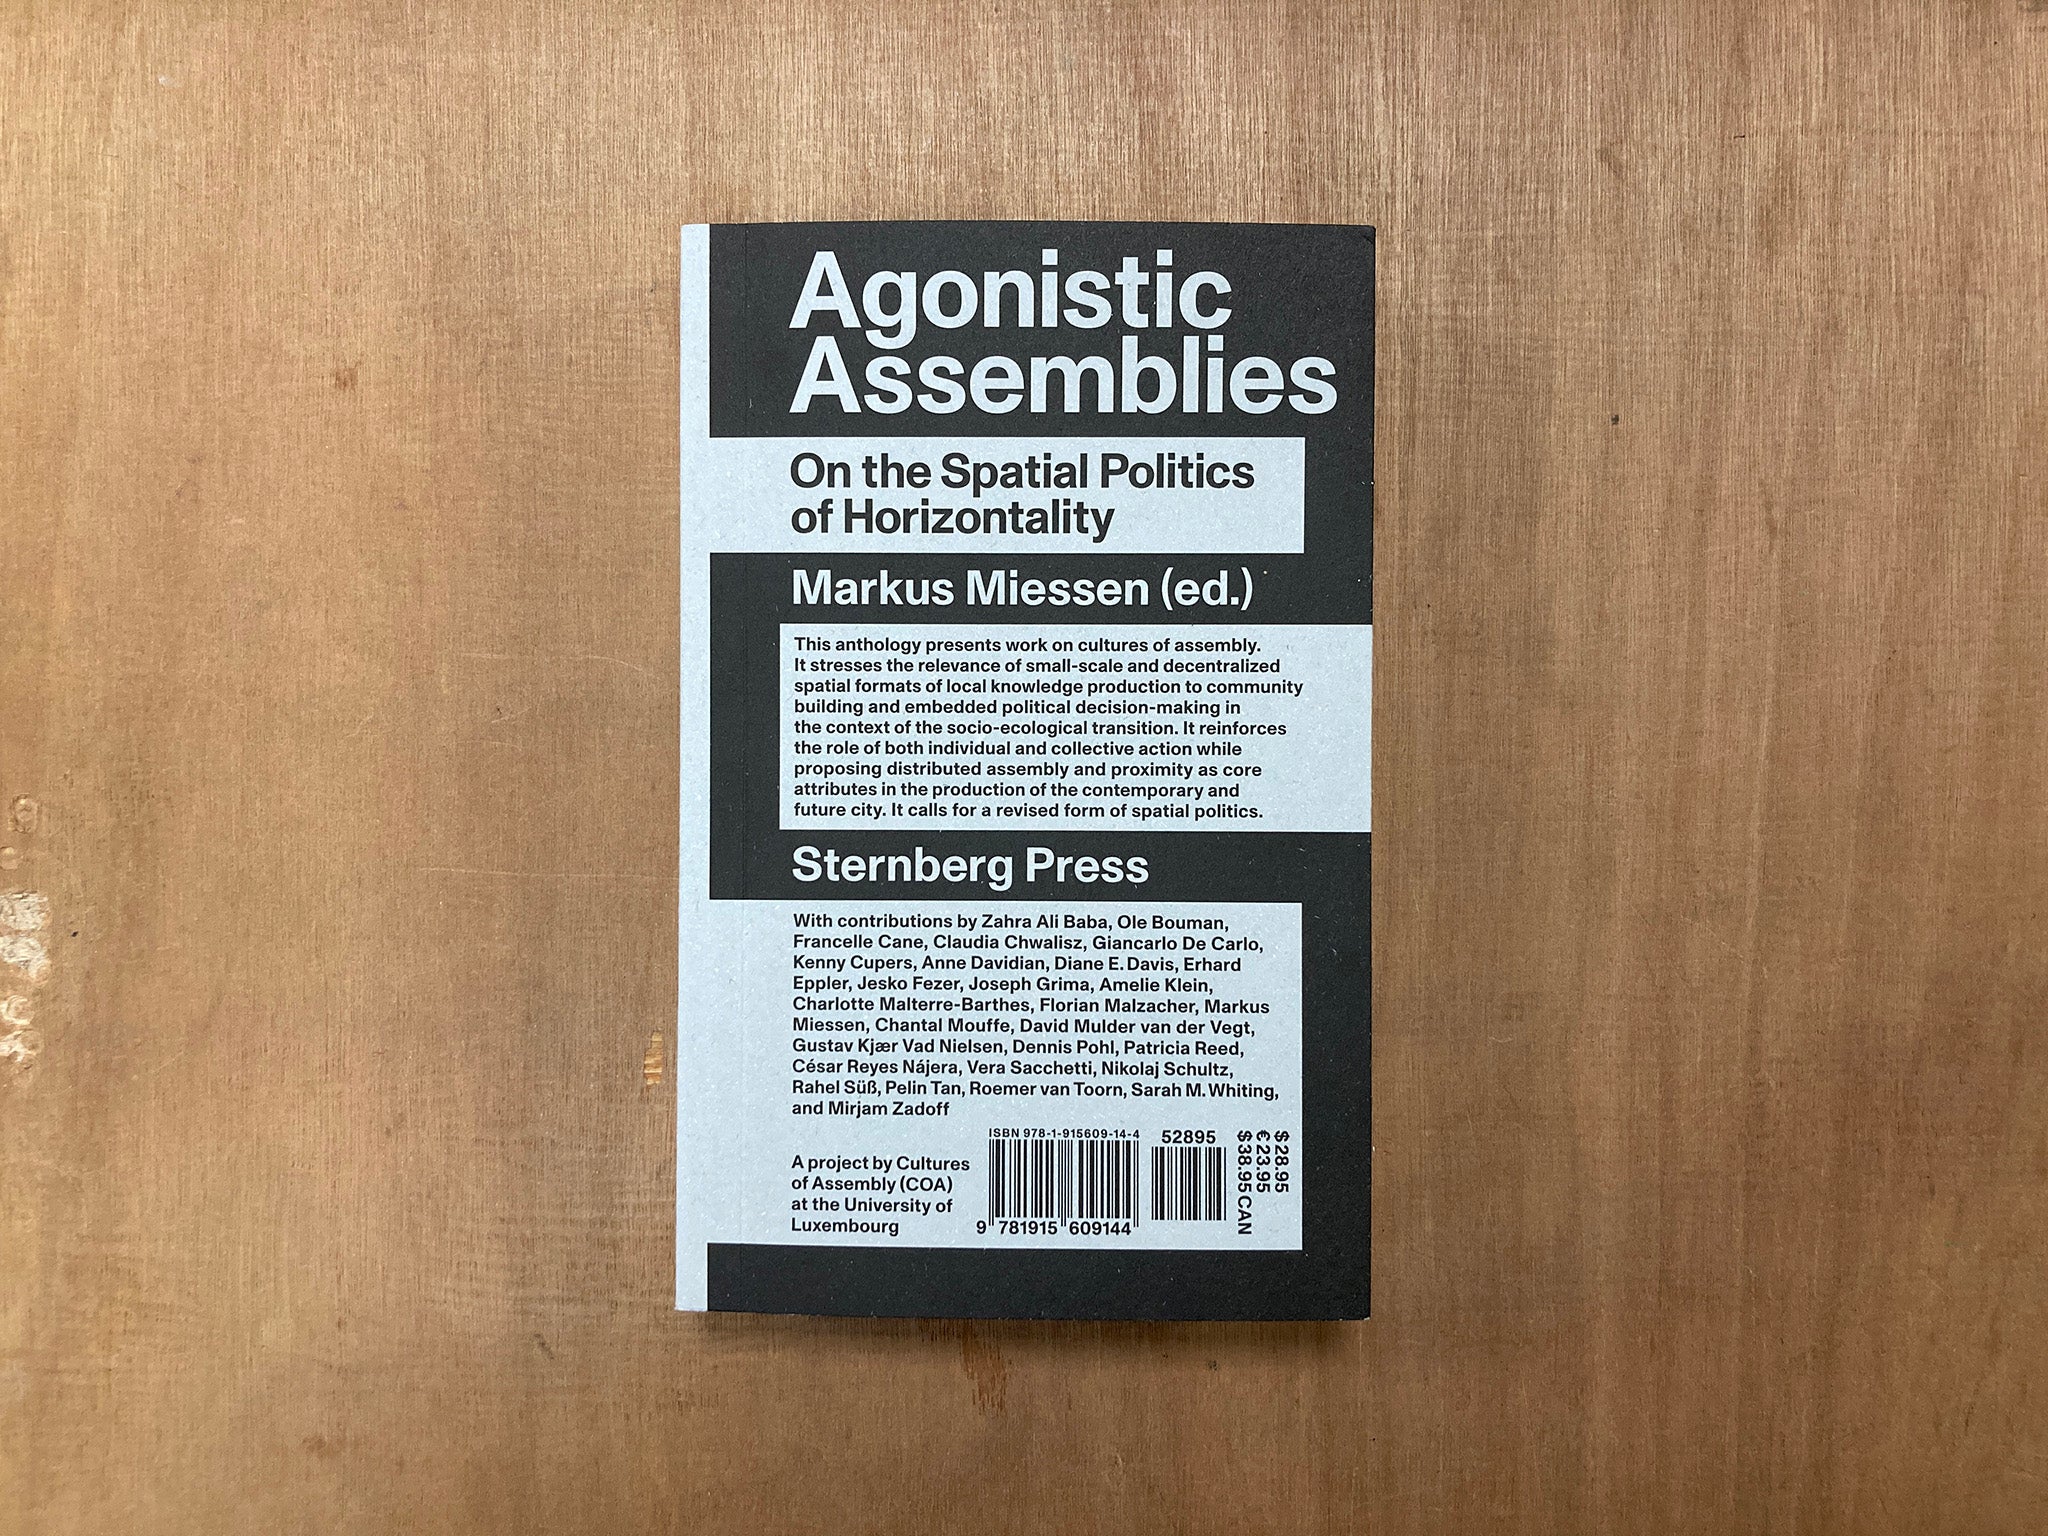 AGONISTIC ASSEMBLIES: ON THE SPATIAL POLITICS OF HORIZONTALITY edited by Markus Miessen